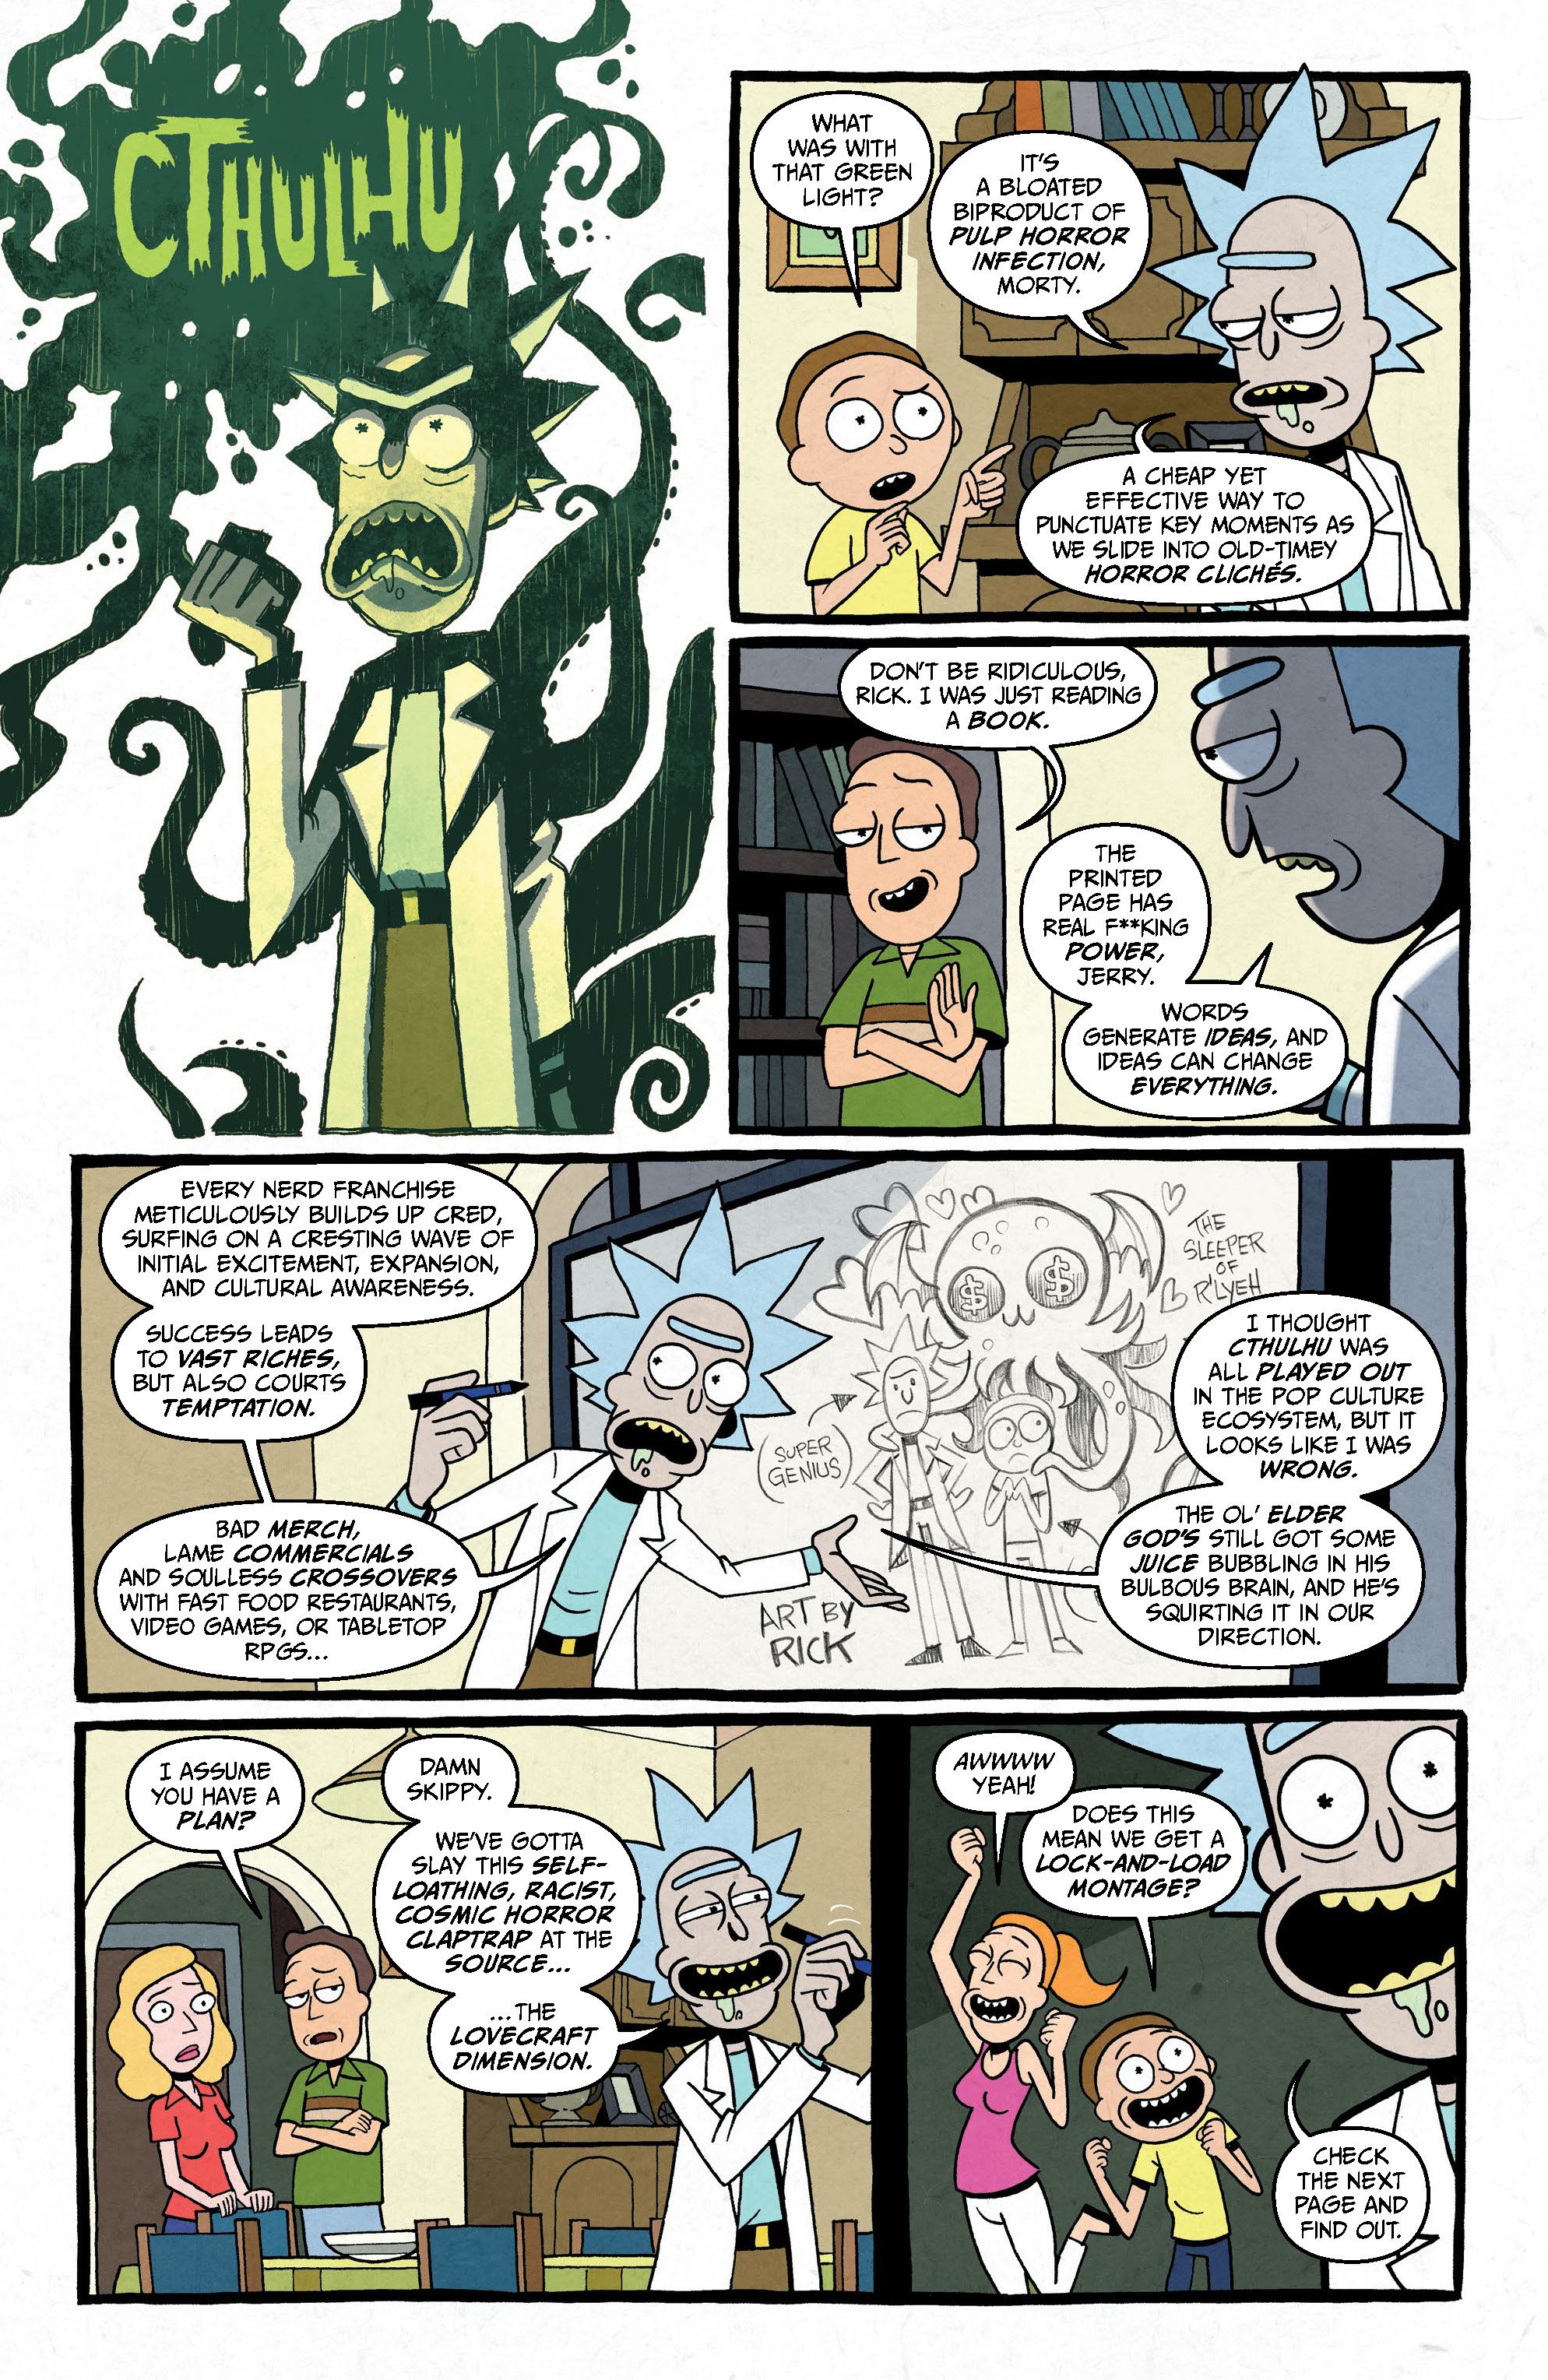 Pages from RICKMORTY CTHULHU #1 Digital Galley_Page_2